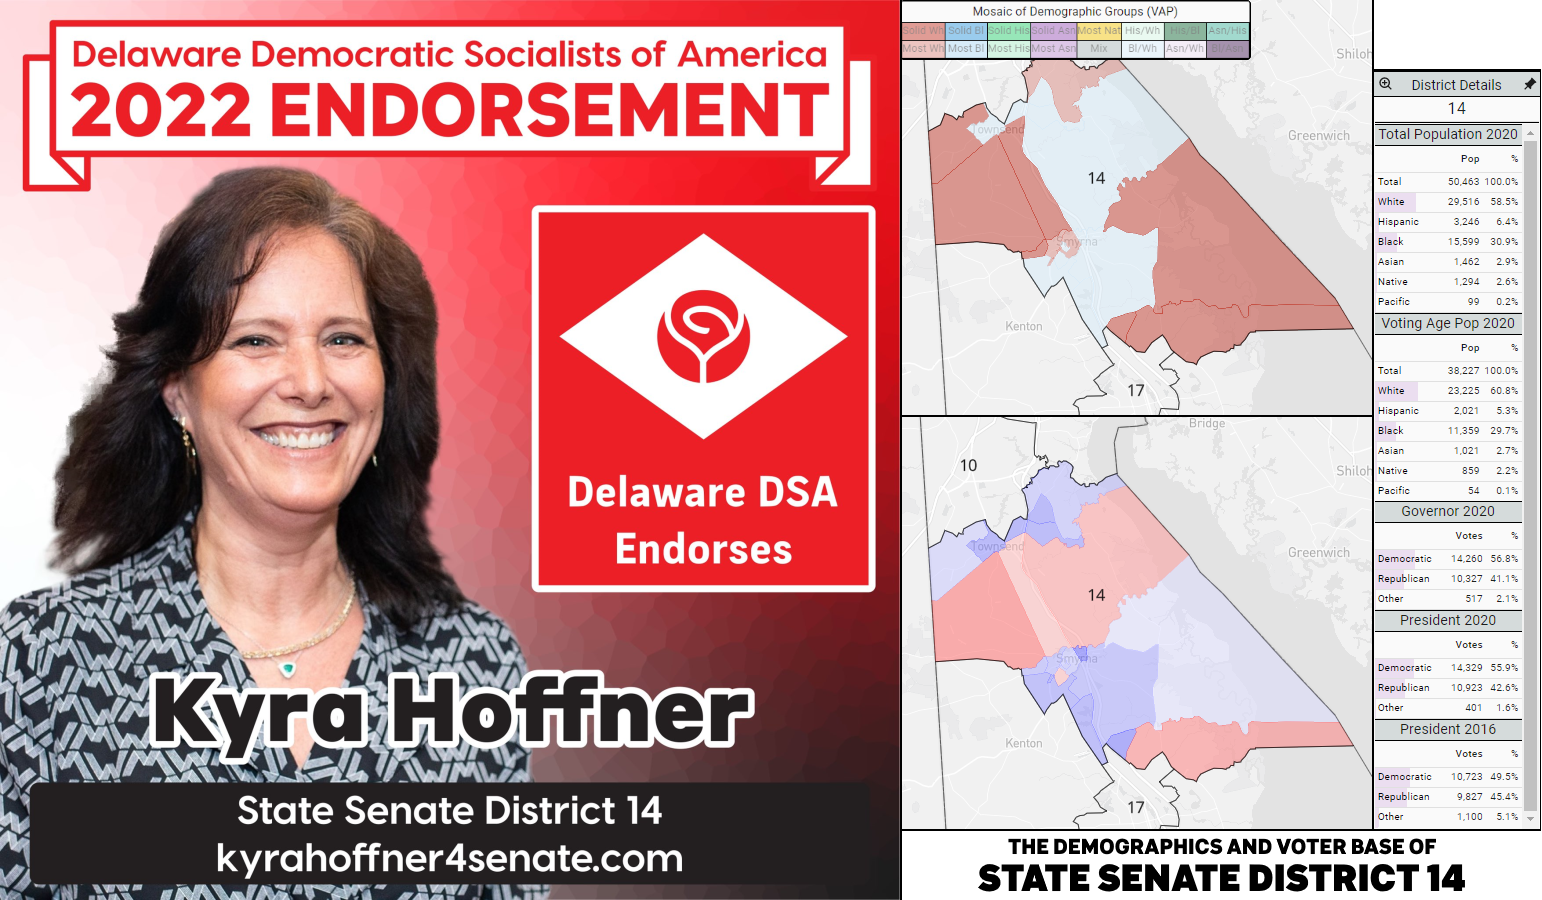 Kyra Hoffner's endorsement graphic (she/her; left) and a graphic of the demographics and voting base of Senate District 14 (right).